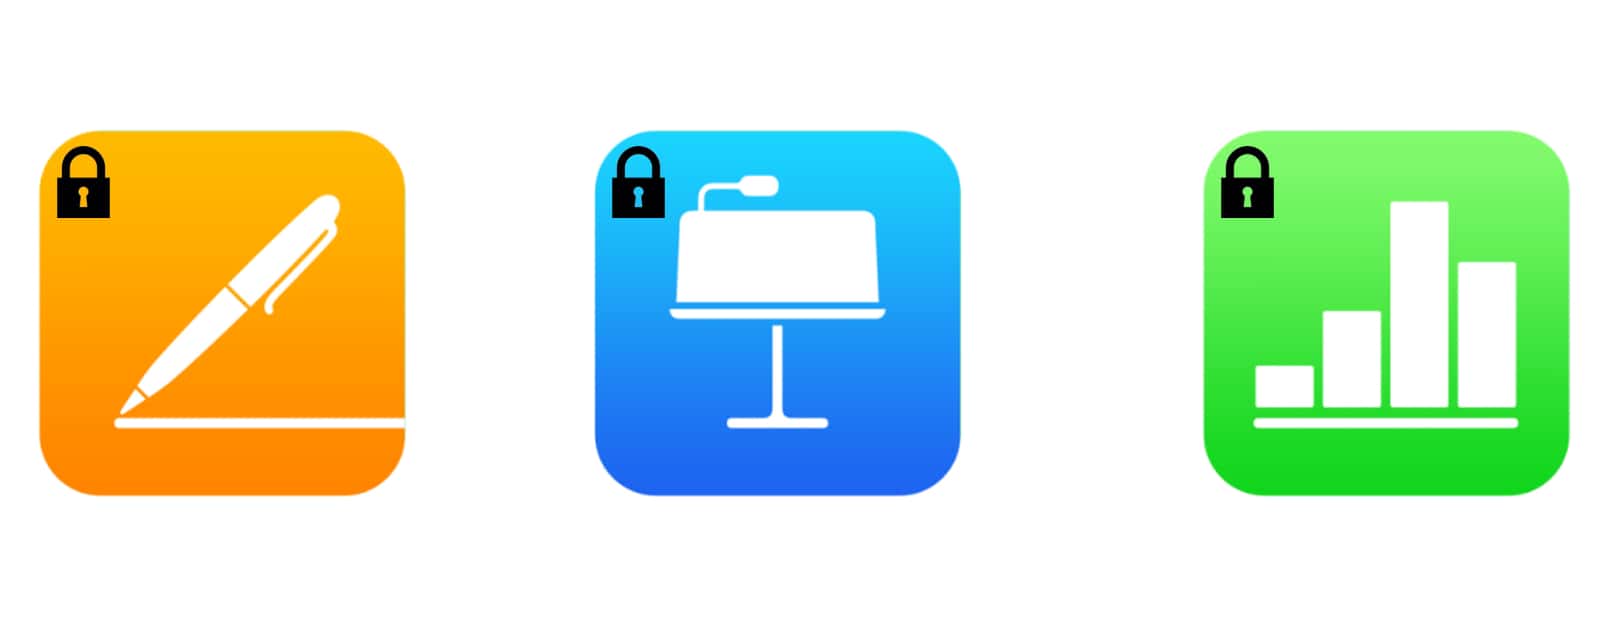 Password Protection Comes To Pages, Numbers, Keynotes on iOS, Mac, iCloud